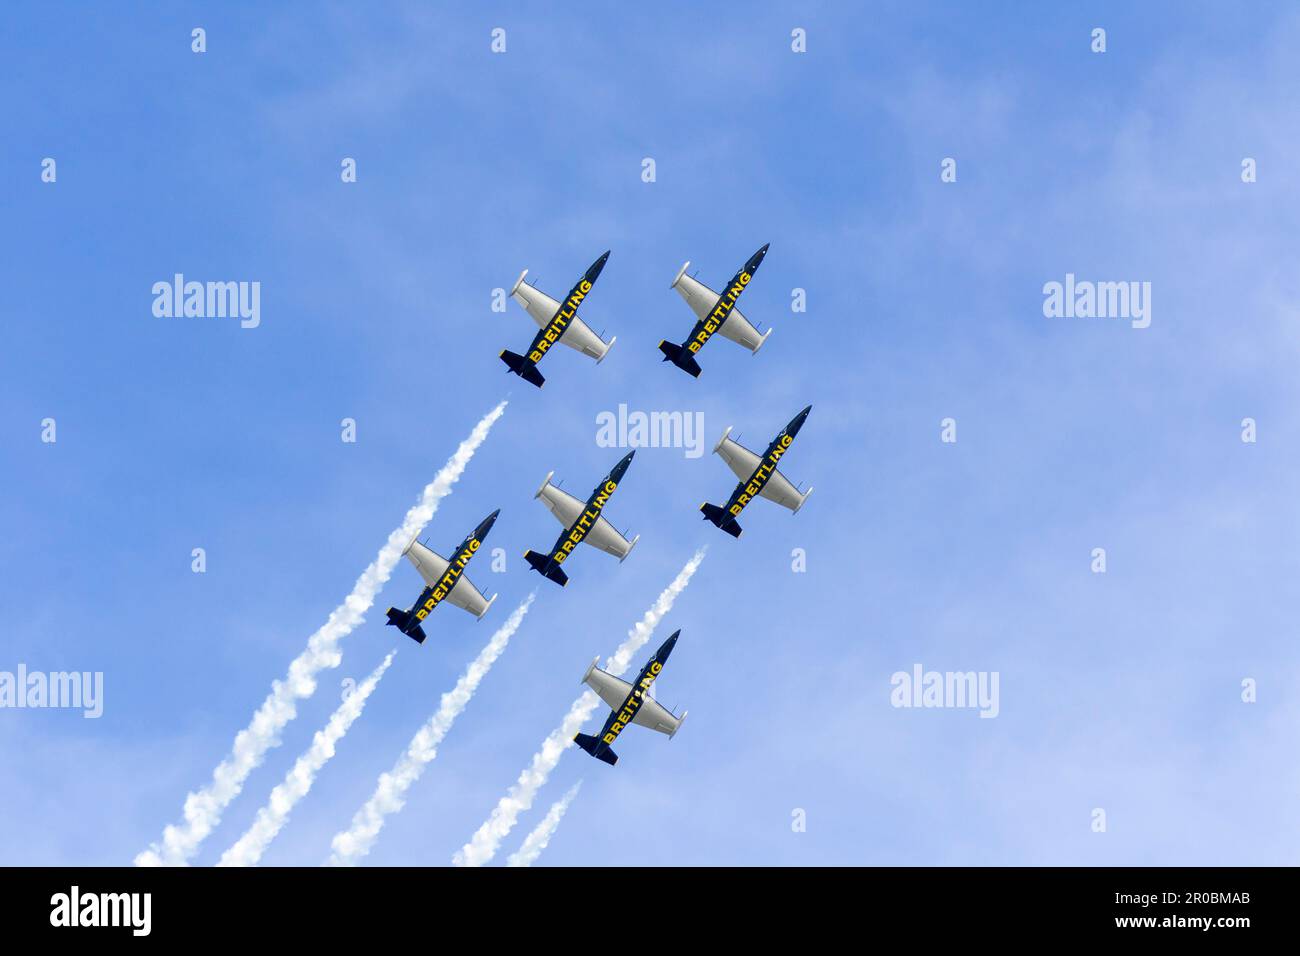 Breitling jet team formation at Aerolac with smoke trail Stock Photo